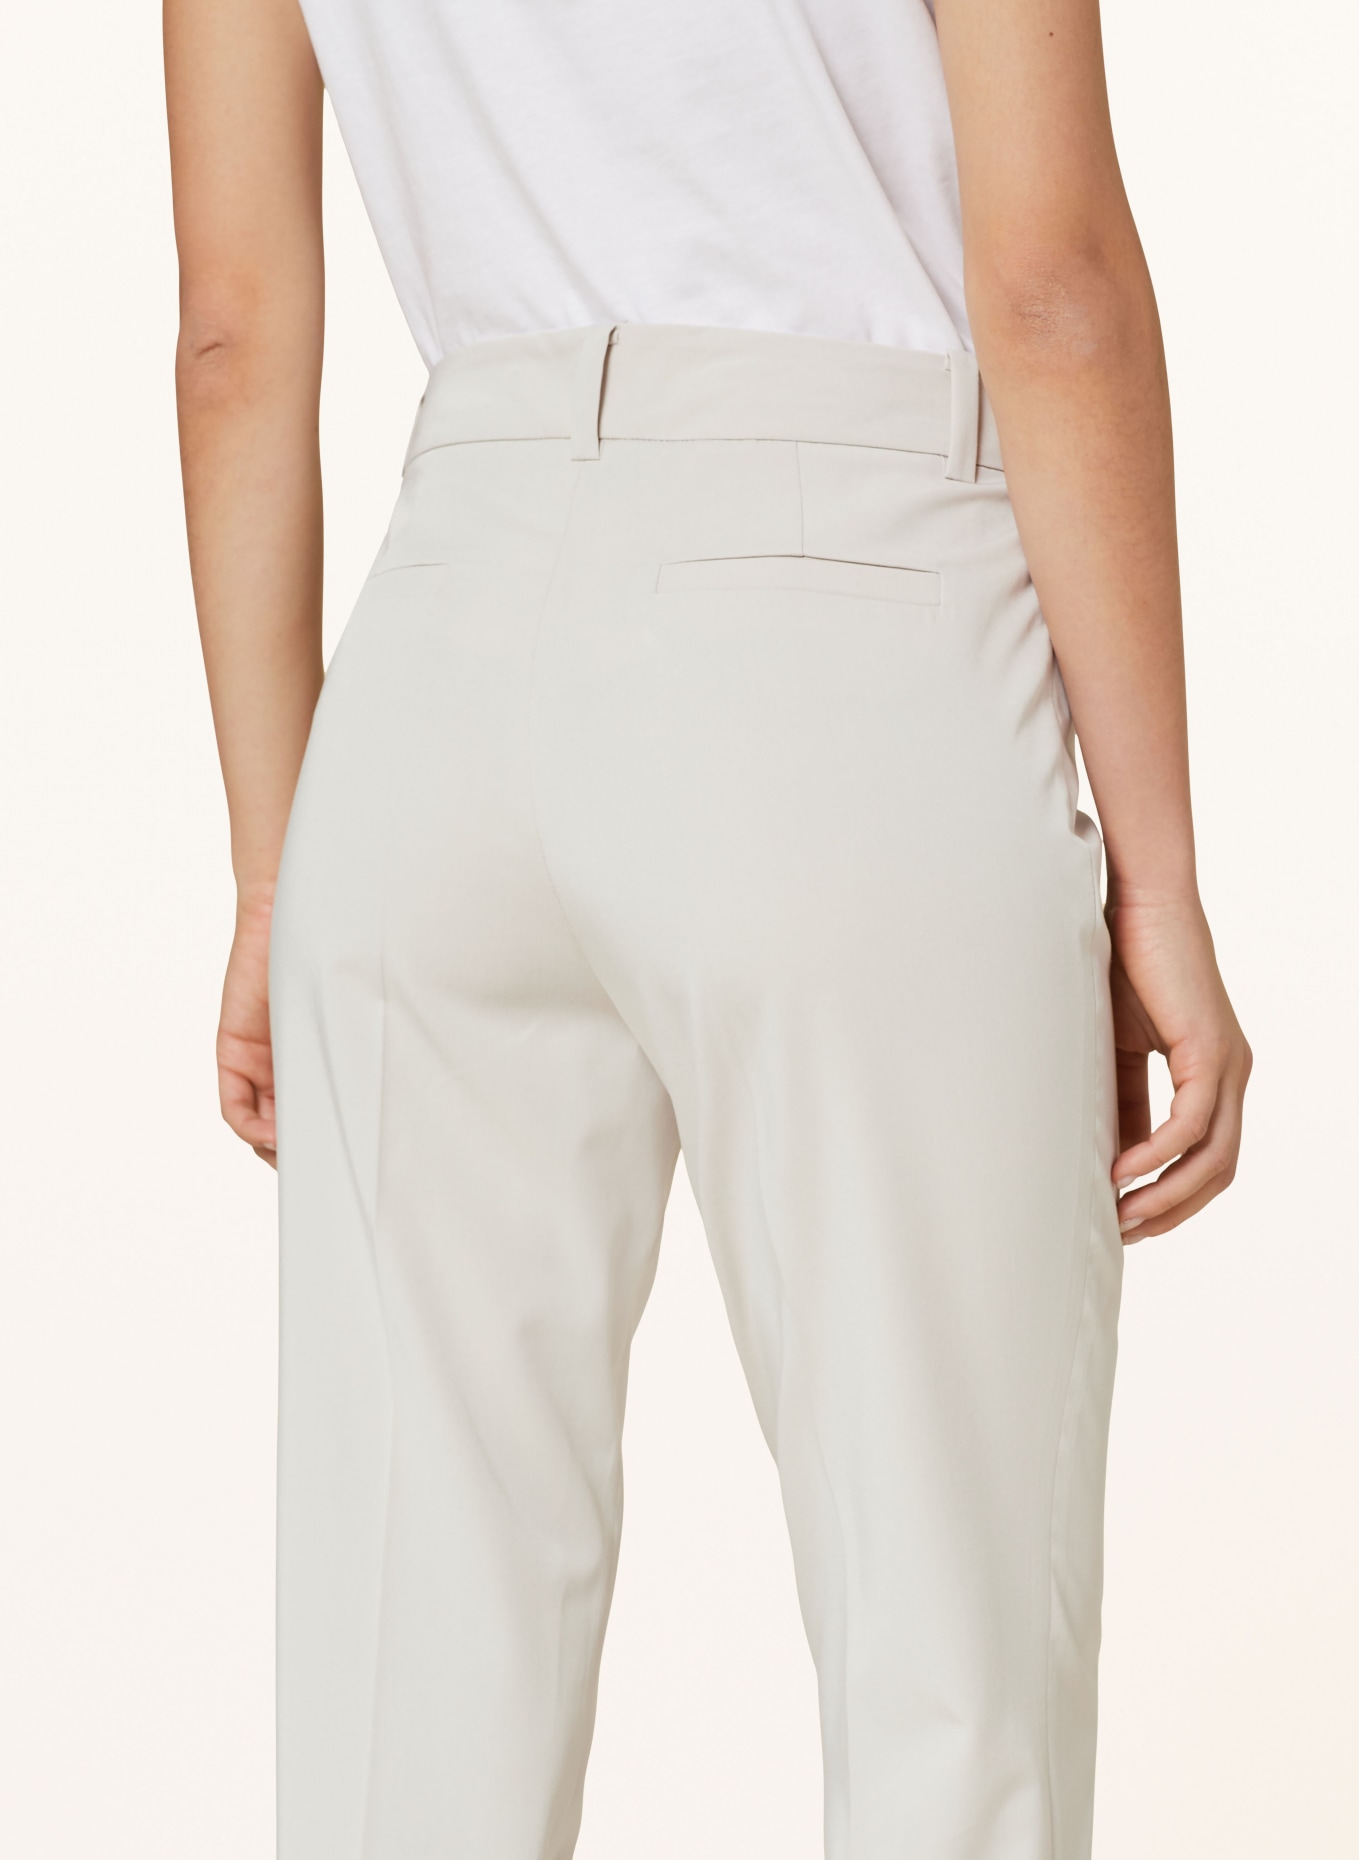 MORE & MORE Trousers HEDY, Color: LIGHT BROWN (Image 5)